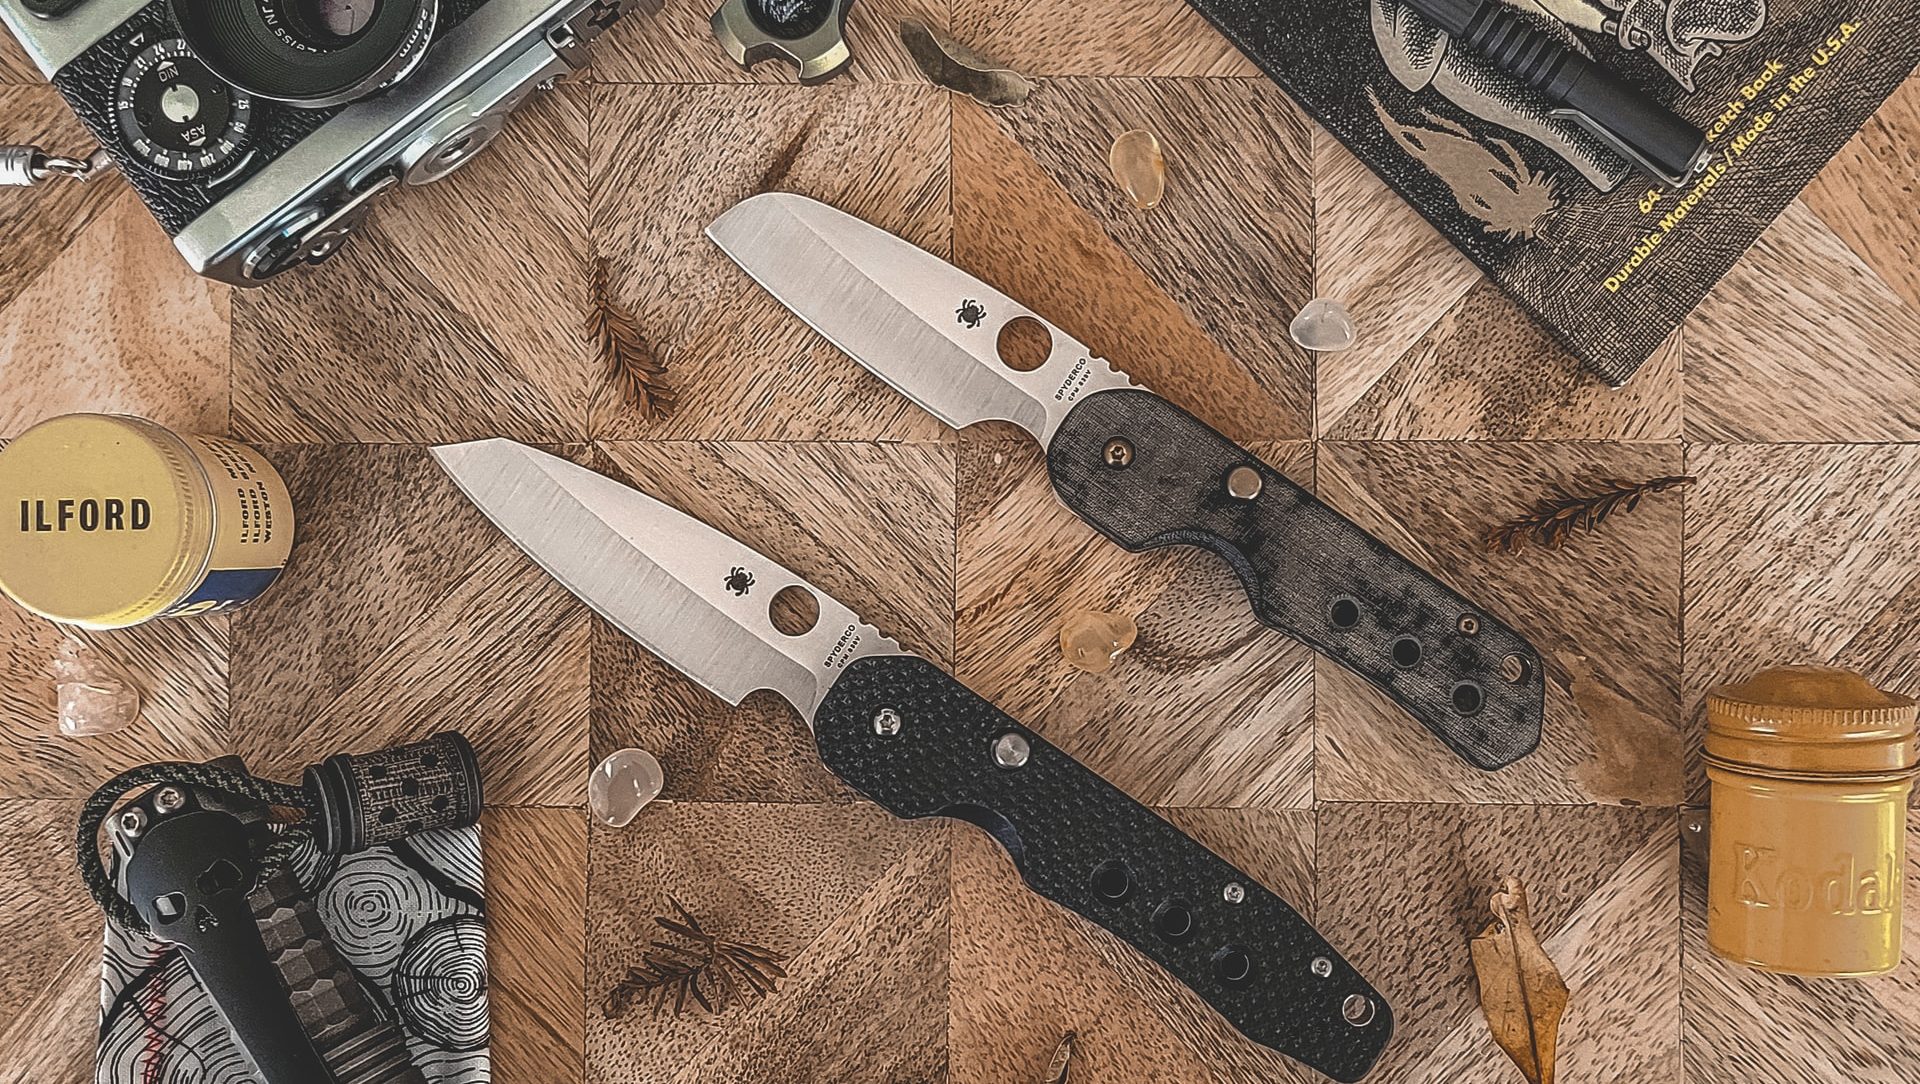 Spyderco Paramilitary 2 vs. Para 3: Which Is Better?